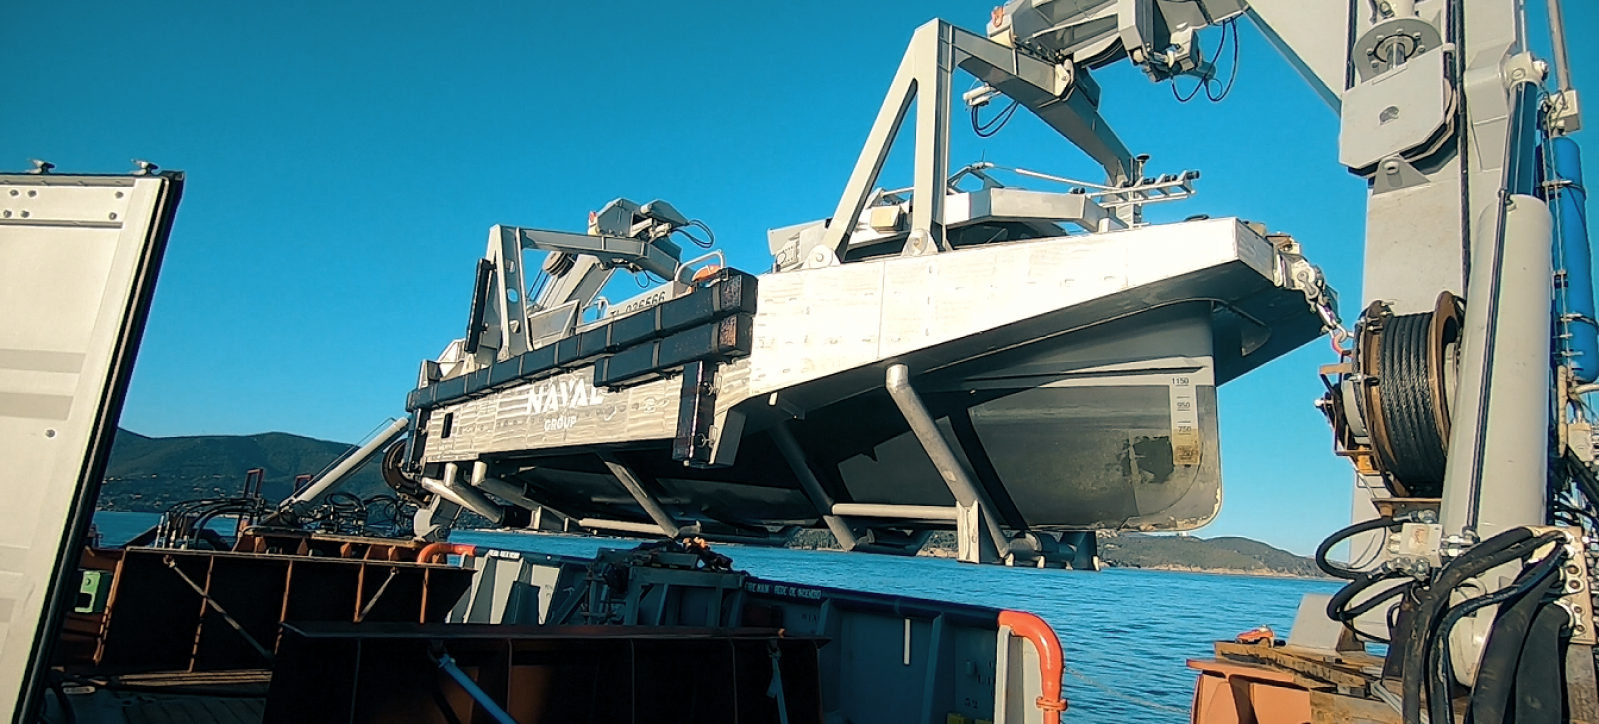 Belgium Naval & Robotics (BNR) solution for lateral deployment and